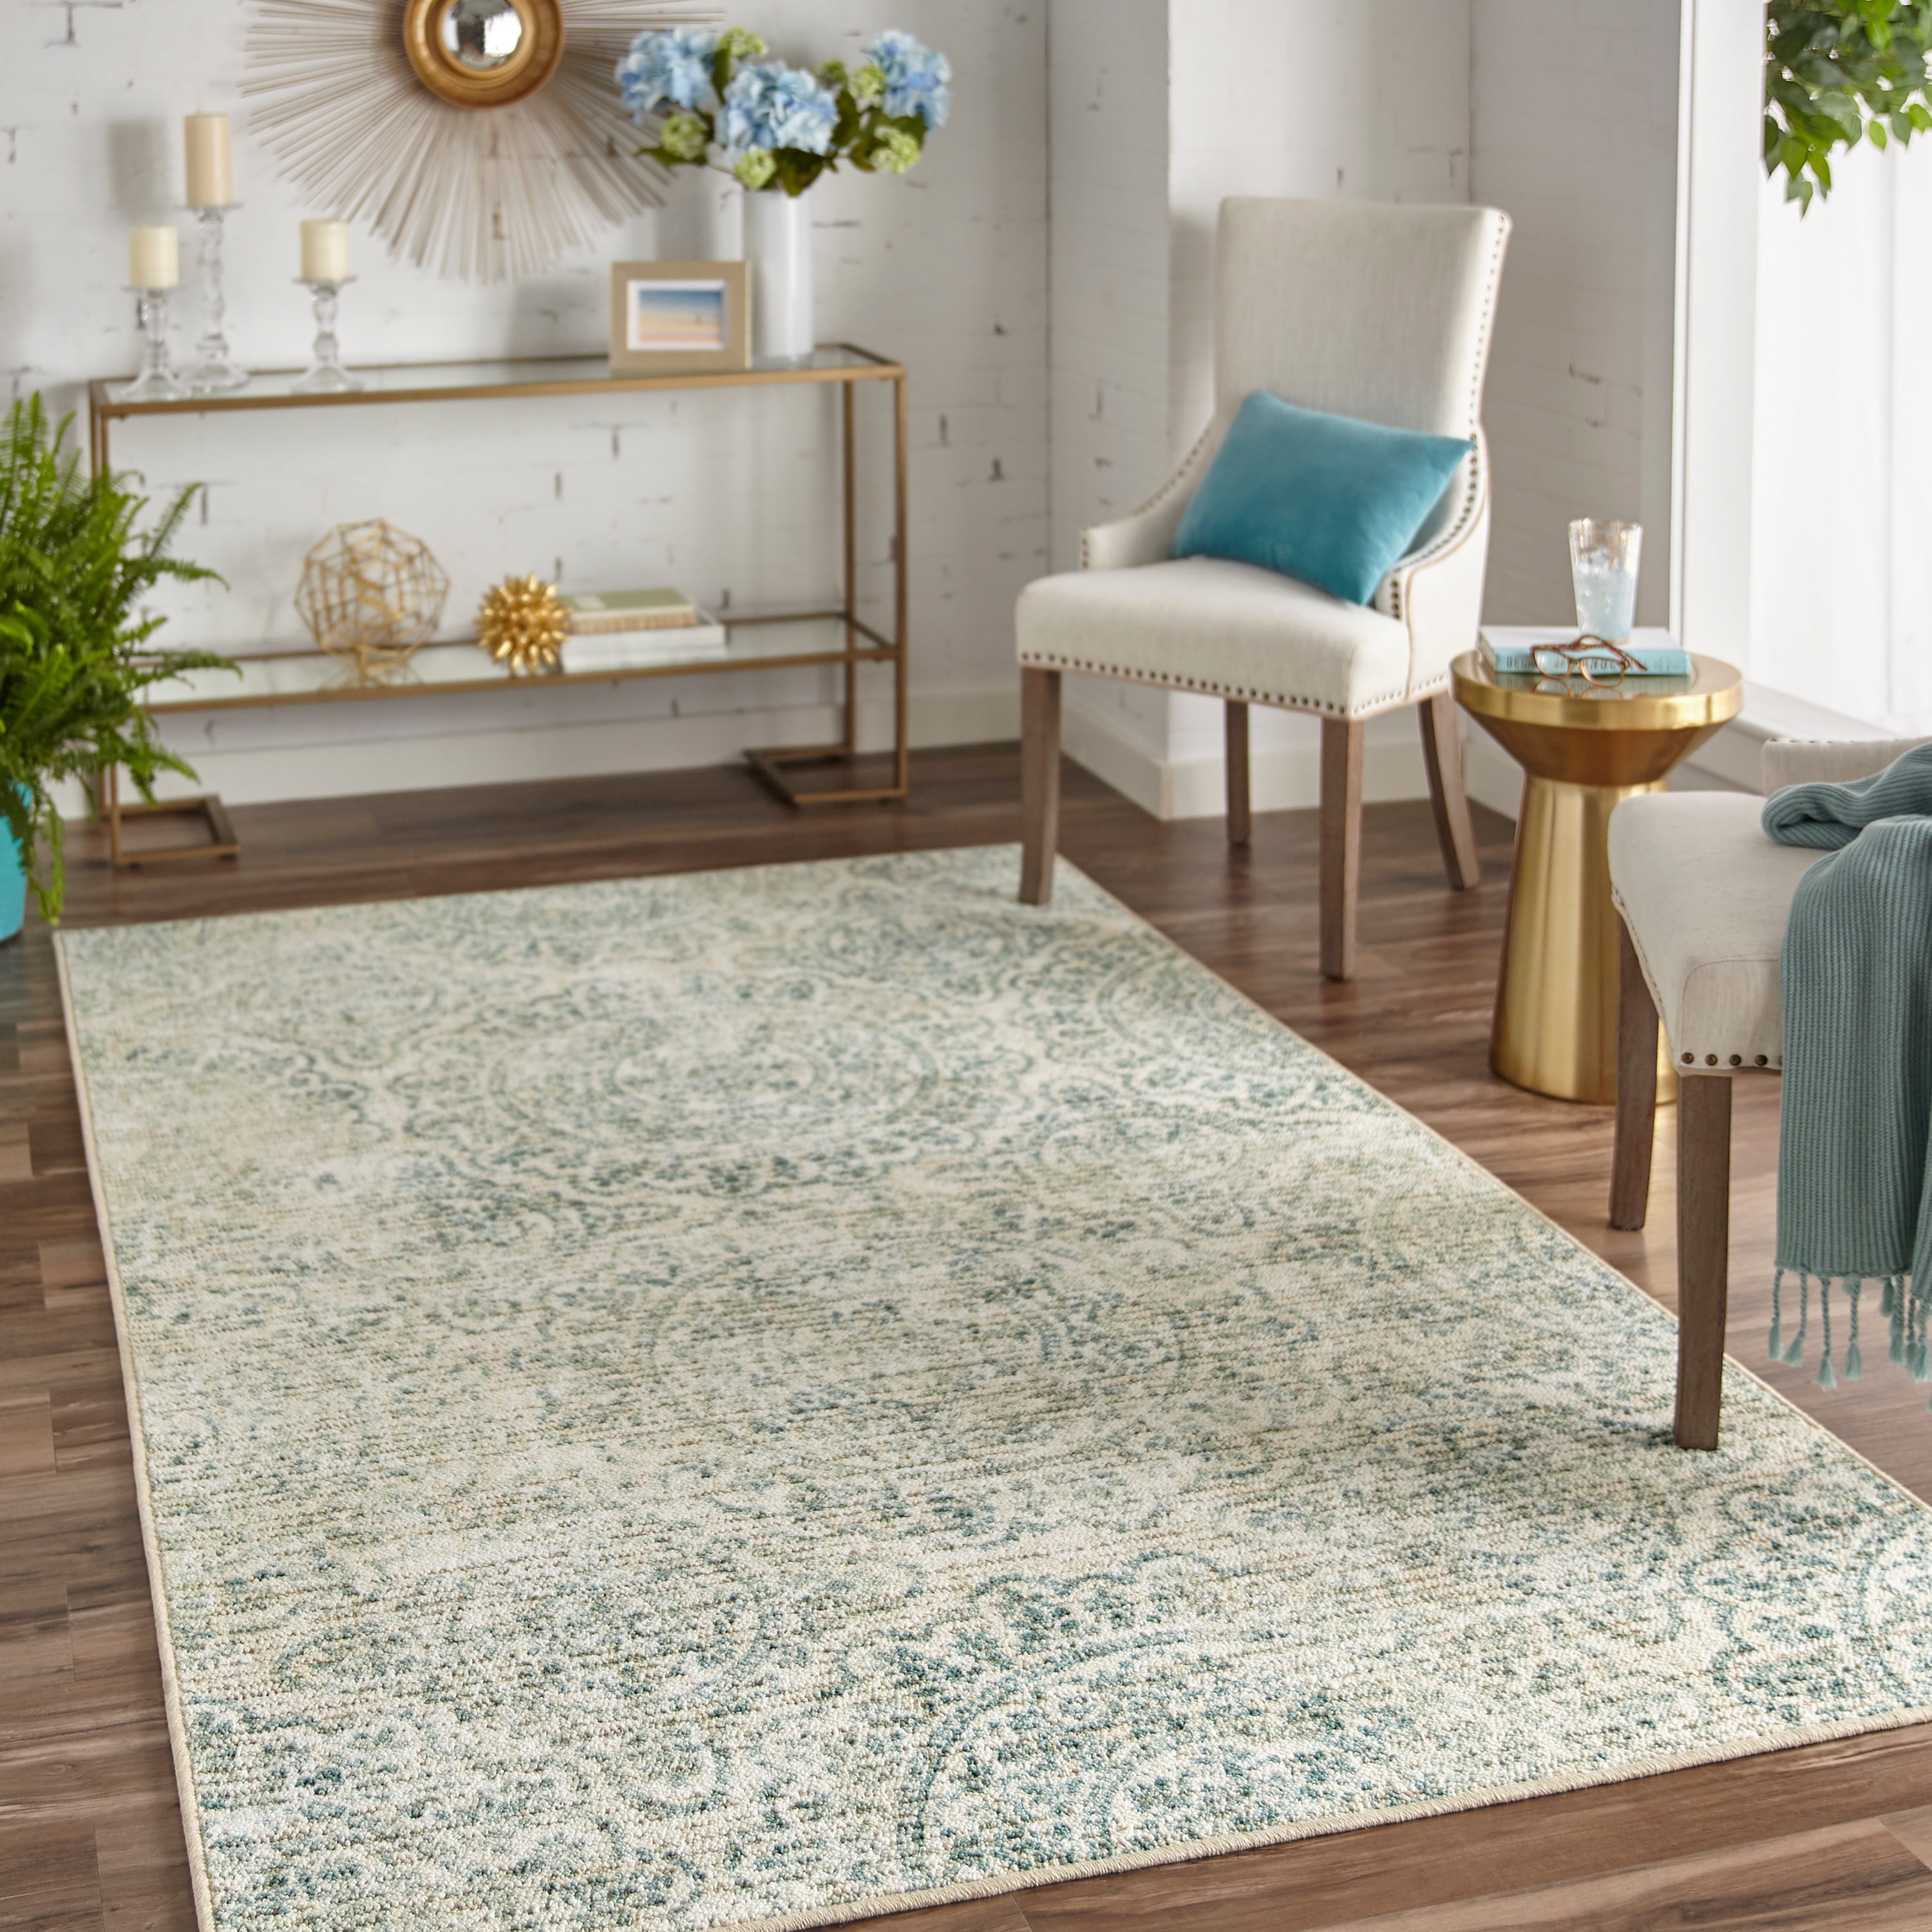 Modern Rug Floral Waves Pattern Cream Teal Carpets Small Large Living room Mats 